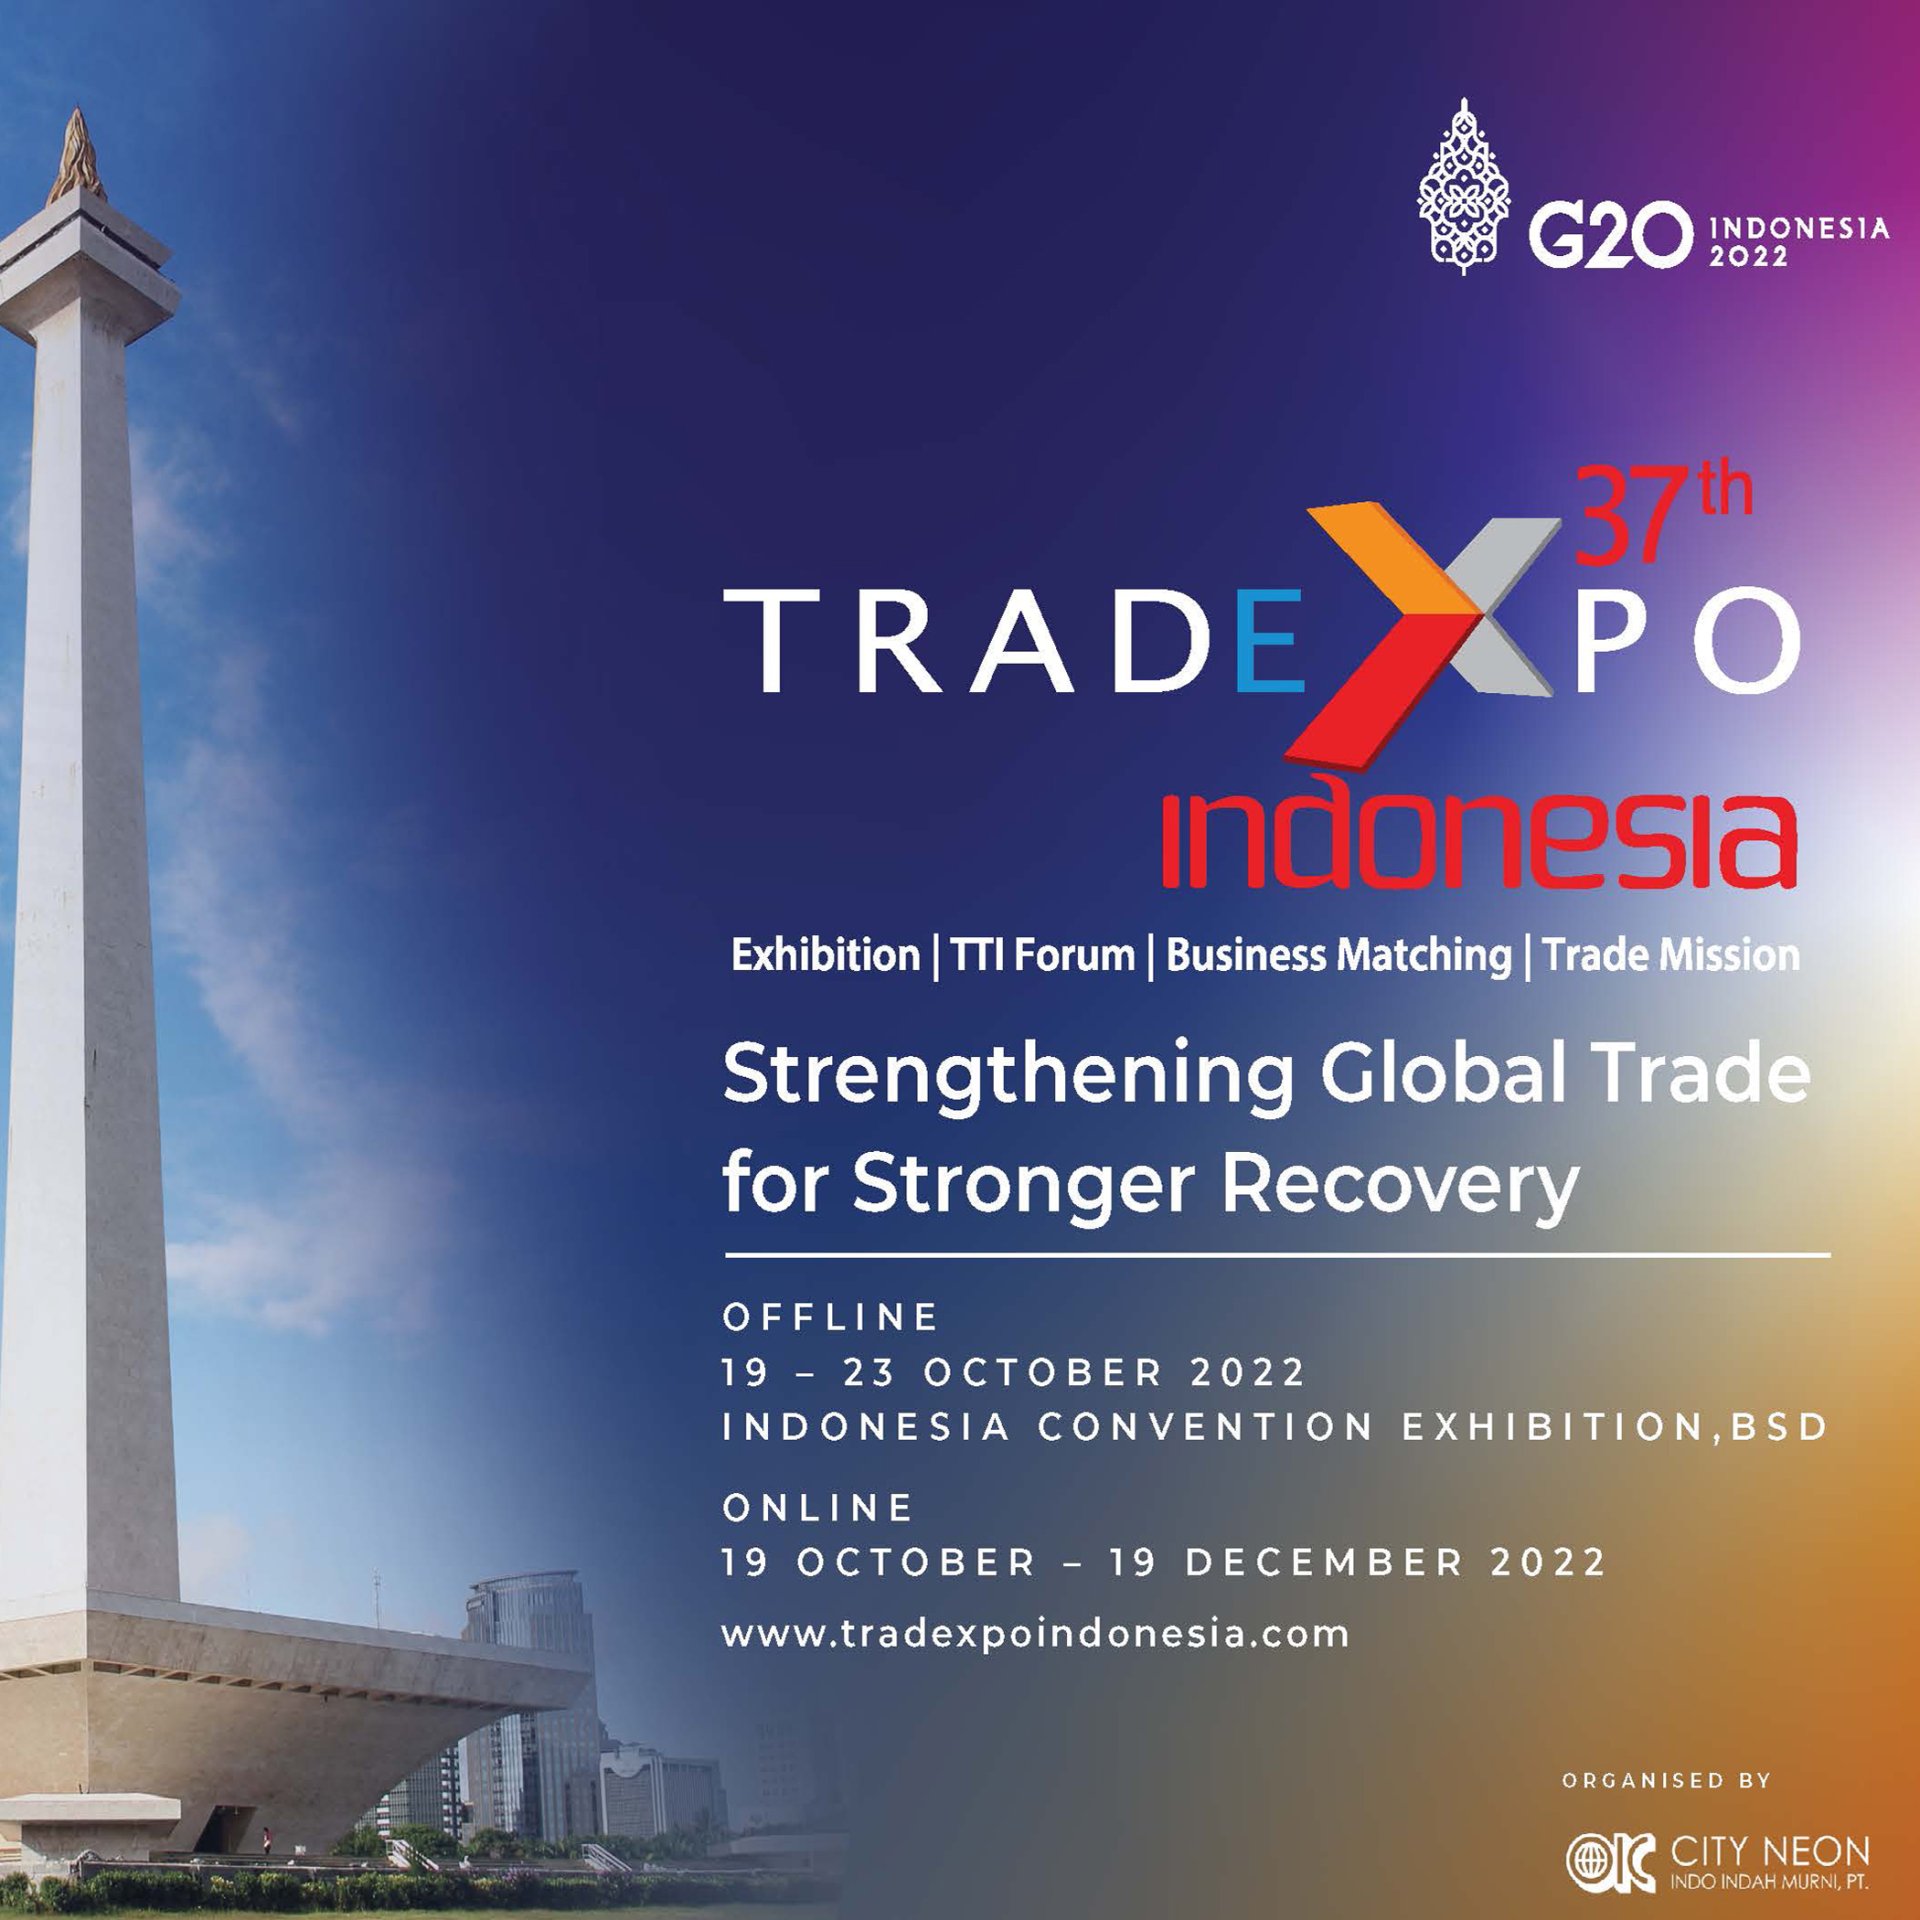 The 37 Trade Expo Indonesia 